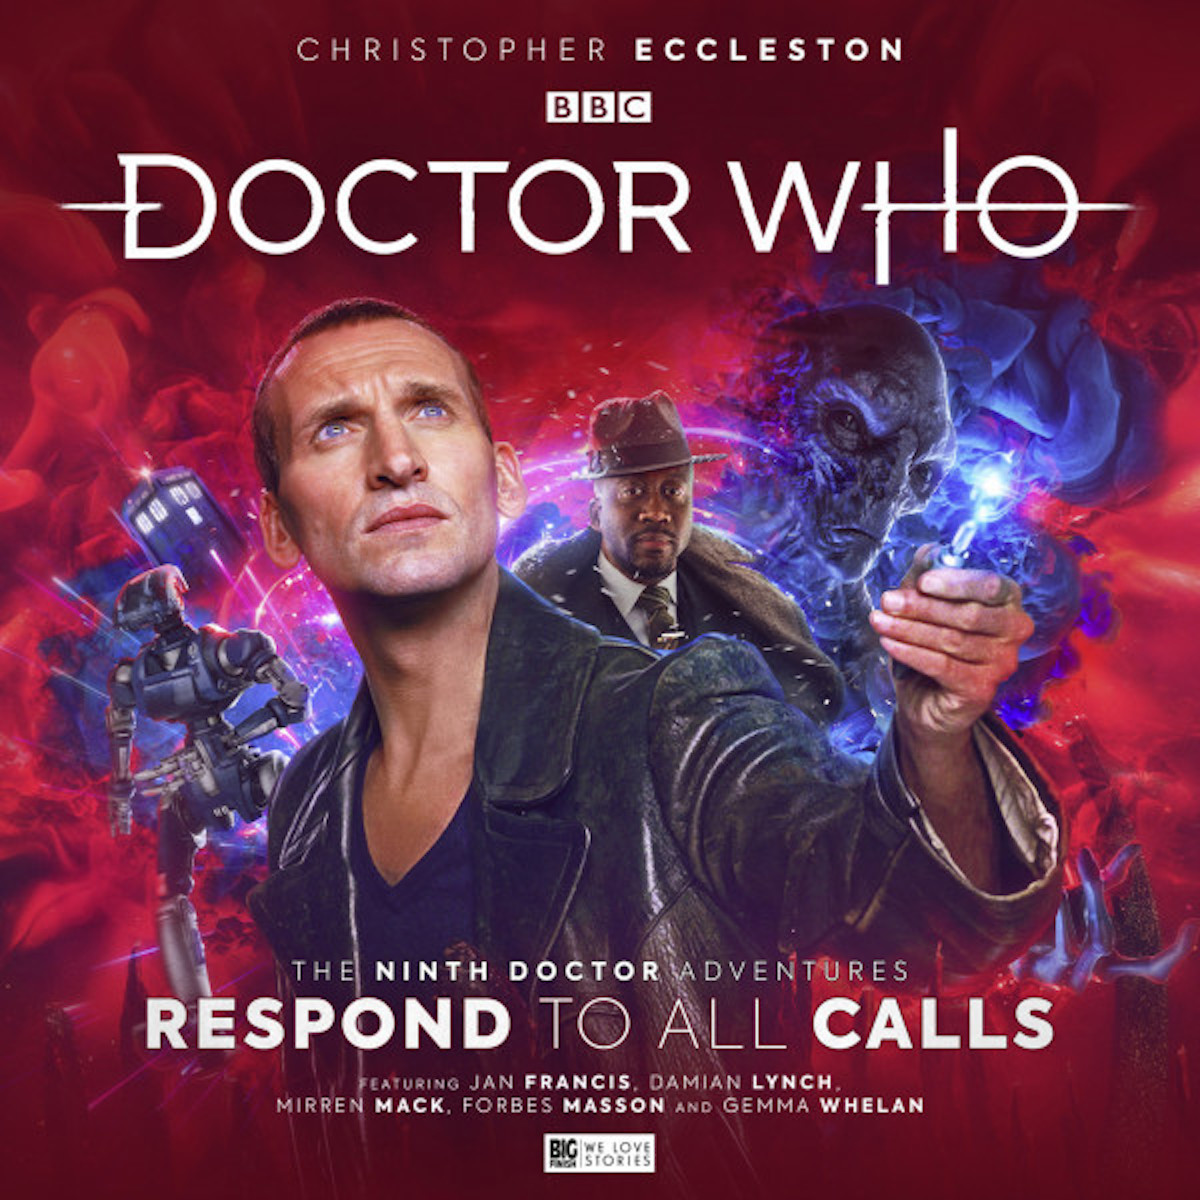 The Ninth Doctor Adventures Volume 2 Respond to Calls